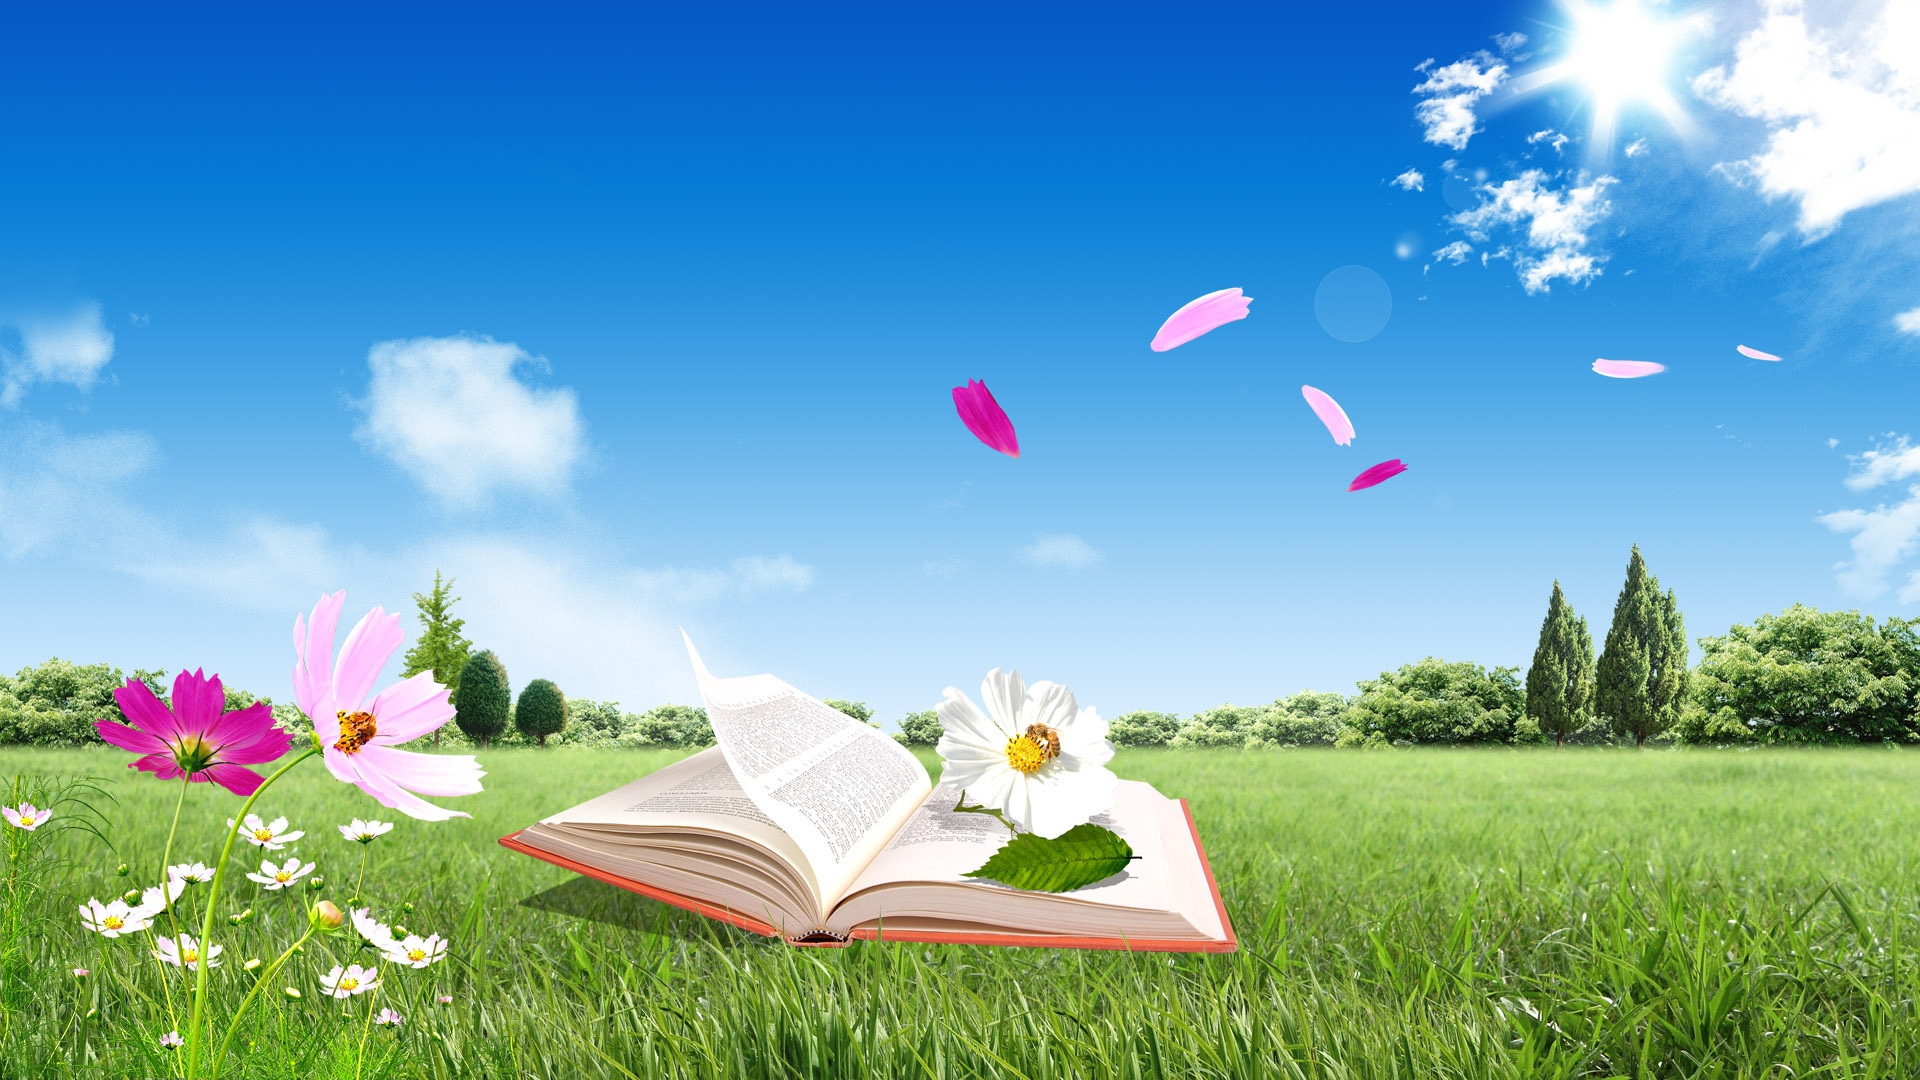 books wallpaper download,people in nature,natural landscape,nature,sky,grass